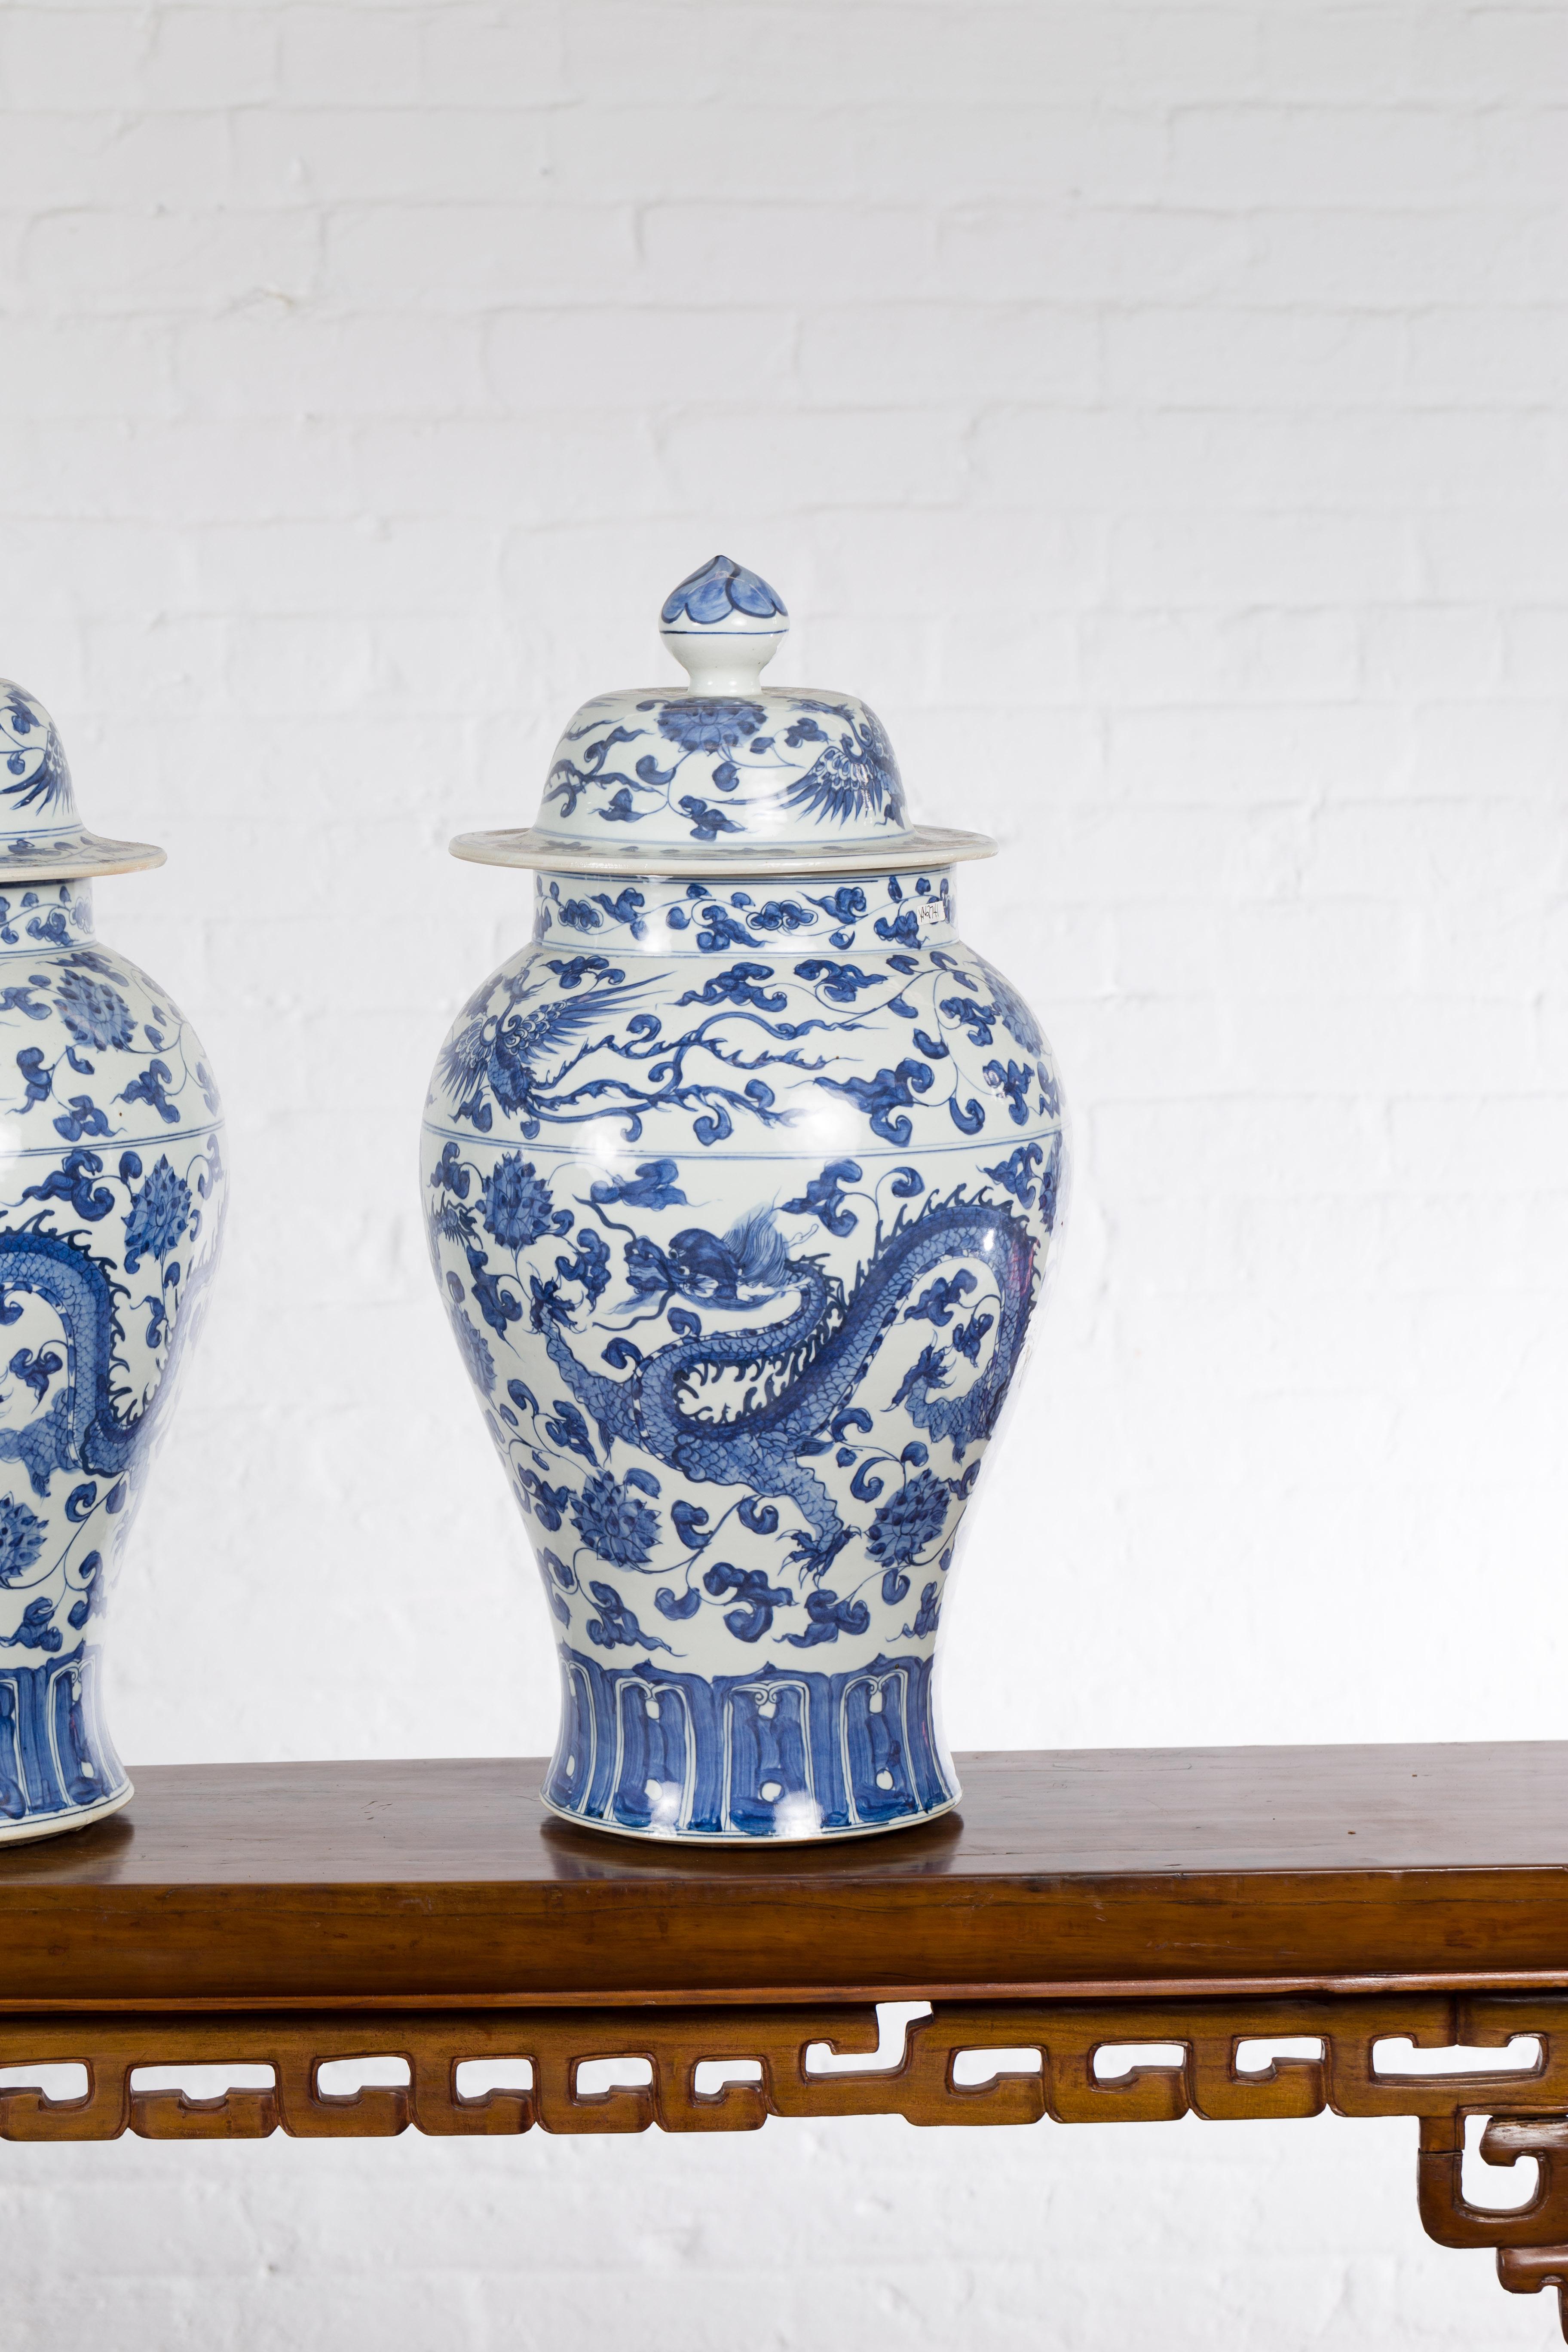 20th Century Pair of Vintage Chinese Blue and white Porcelain Lidded Jars with Dragon Motifs